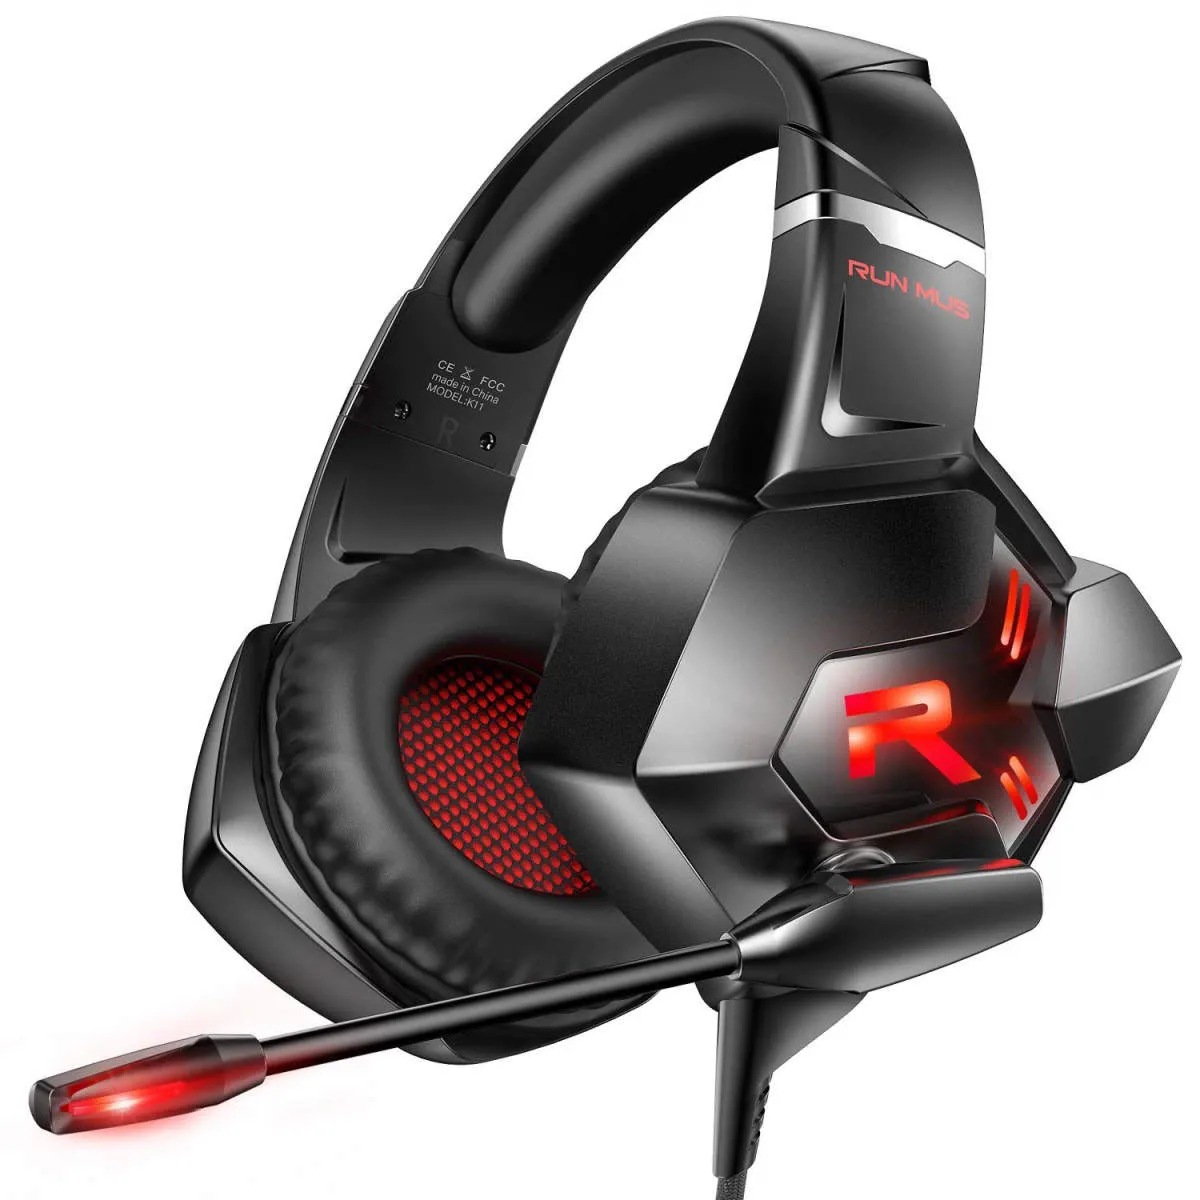 Best Audio Brands for Gamers